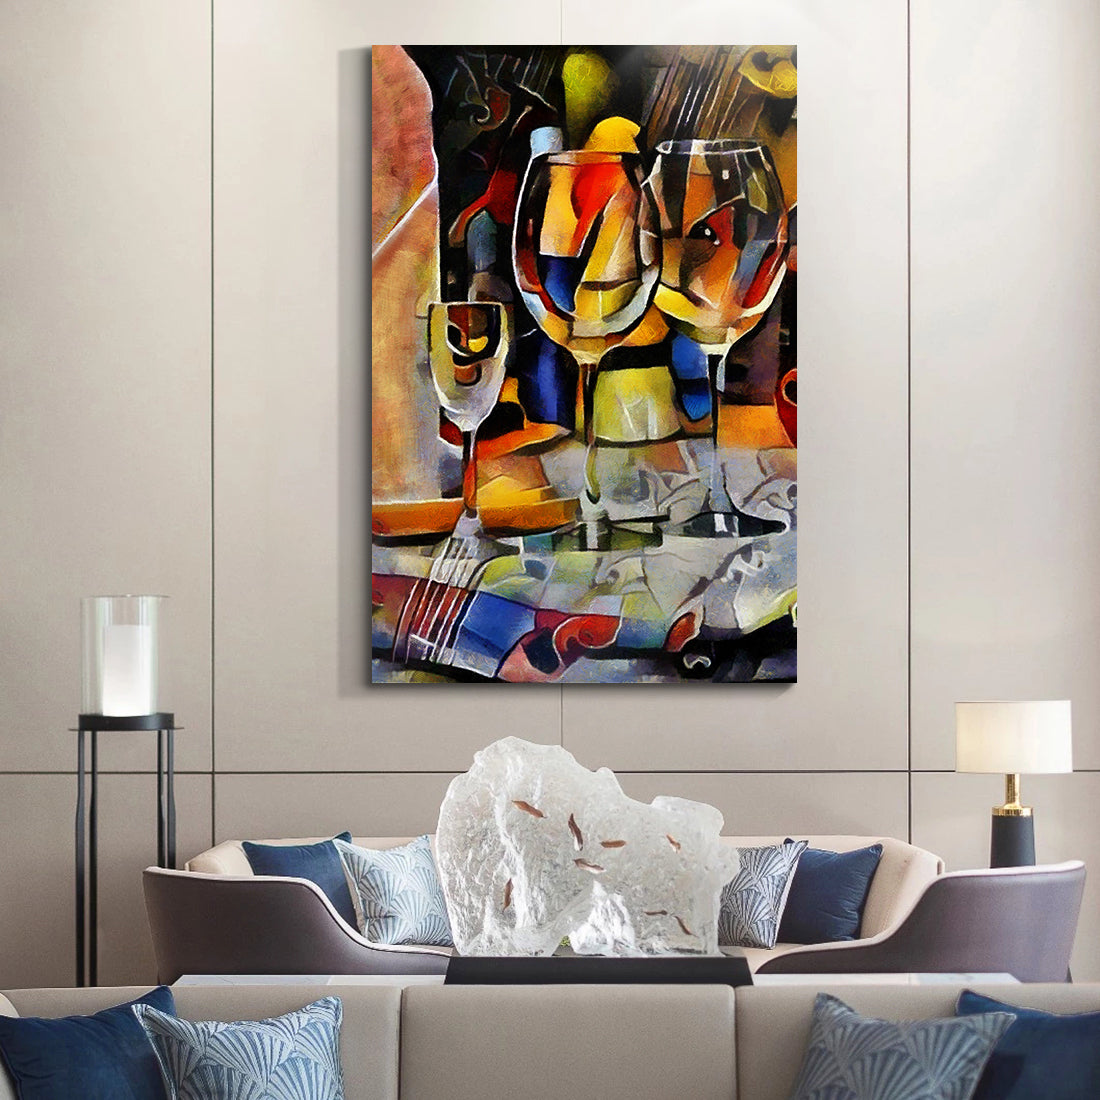 Framed Canvas Wall Art Decor Abstract Style Painting,Wine Bottle with Glasses on Bar Painting Decoration For Bar, Restrant, Kitchen, Dining Room, Office Living Room, Bedroom Decor-Ready To Hang